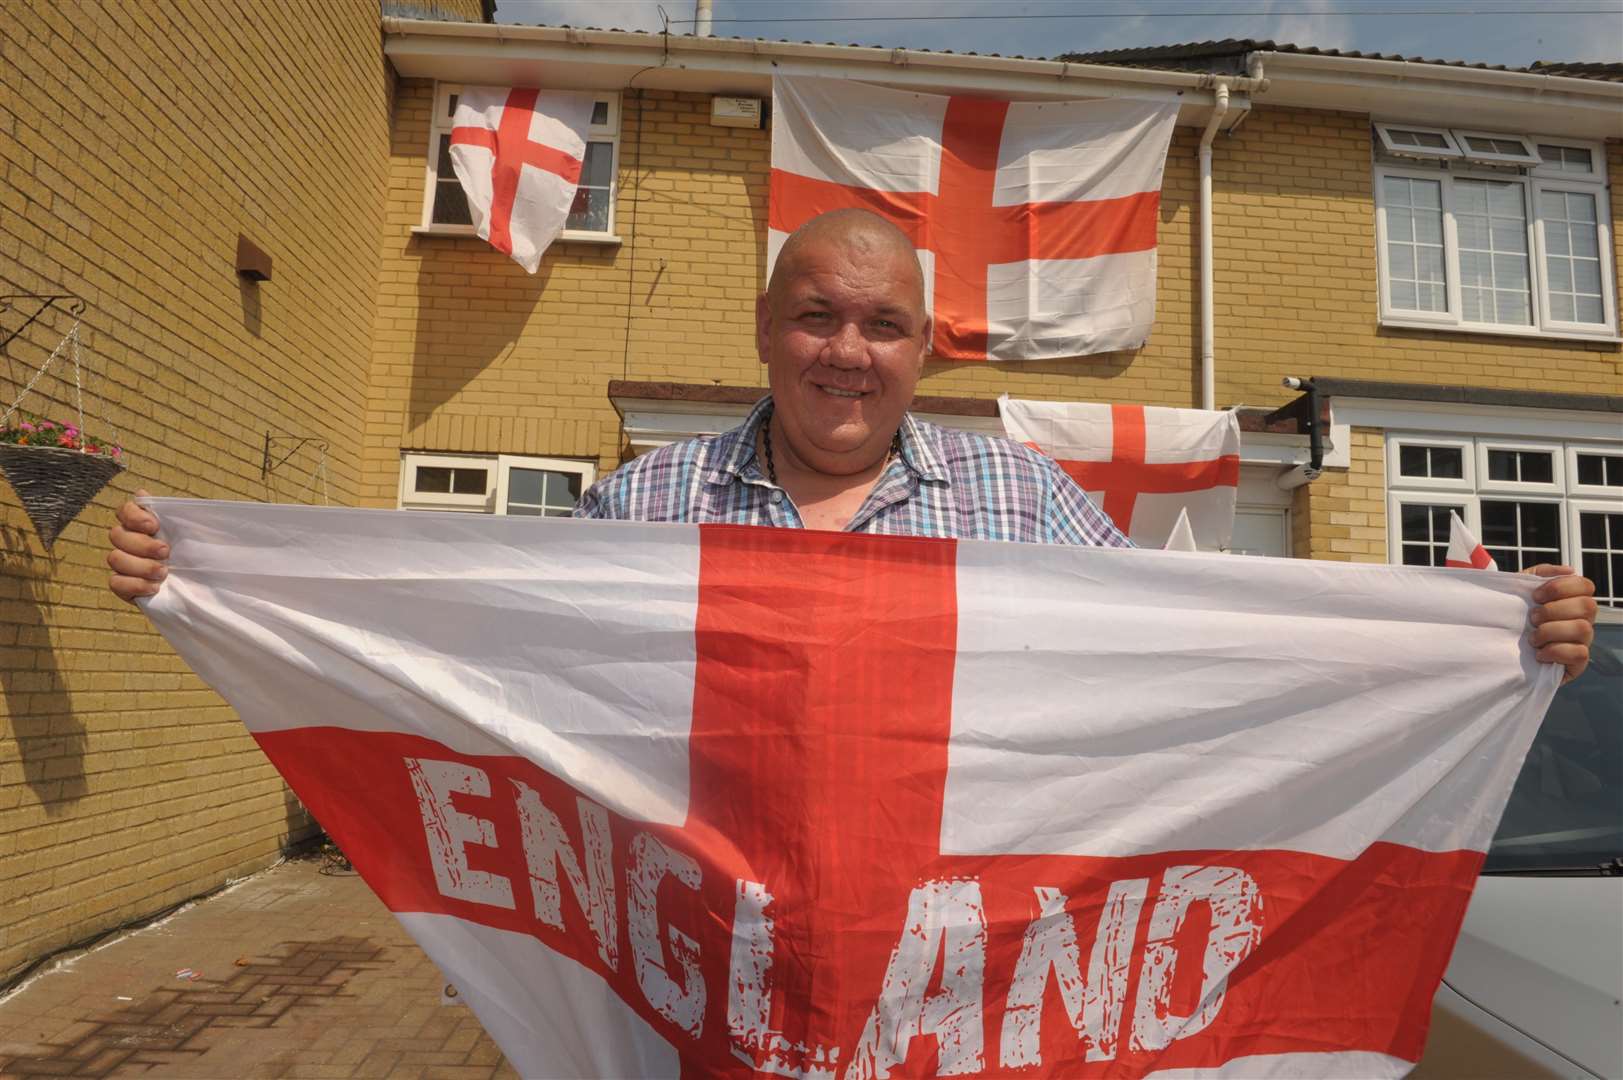 Despite his flag creating a Twitter storm last time, Dan is waving them proudly once again ahead of England's match tonight.Picture: Steve Crispe. (2924229)